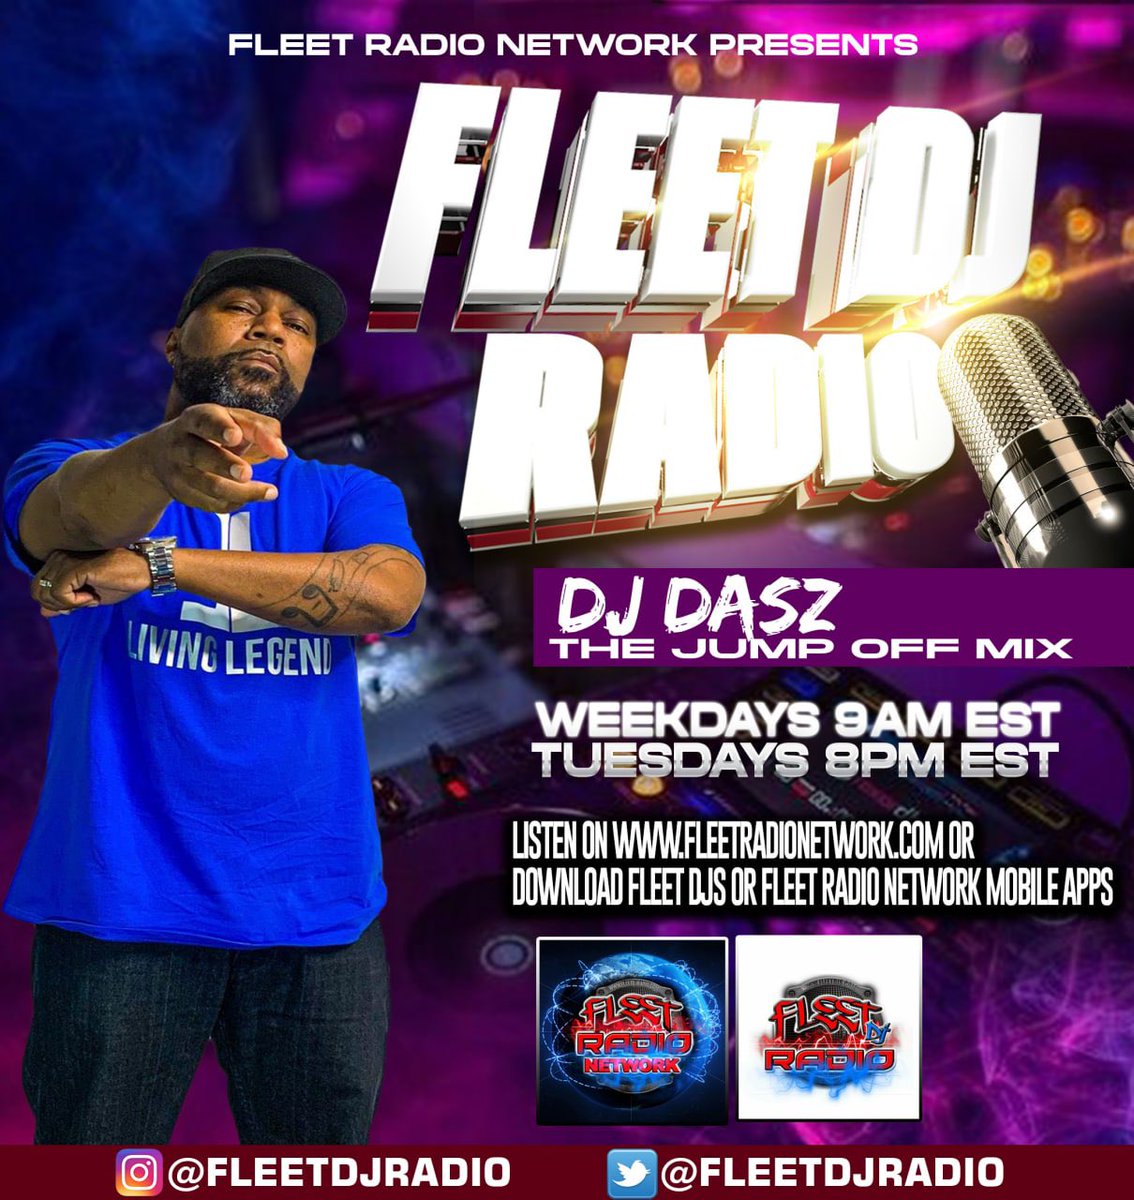 Check out @IAM_DJDASZ weekday mornings 9a in the morning big mix and Tuesdays 9p est nothing but bangers on @fleetdjradio